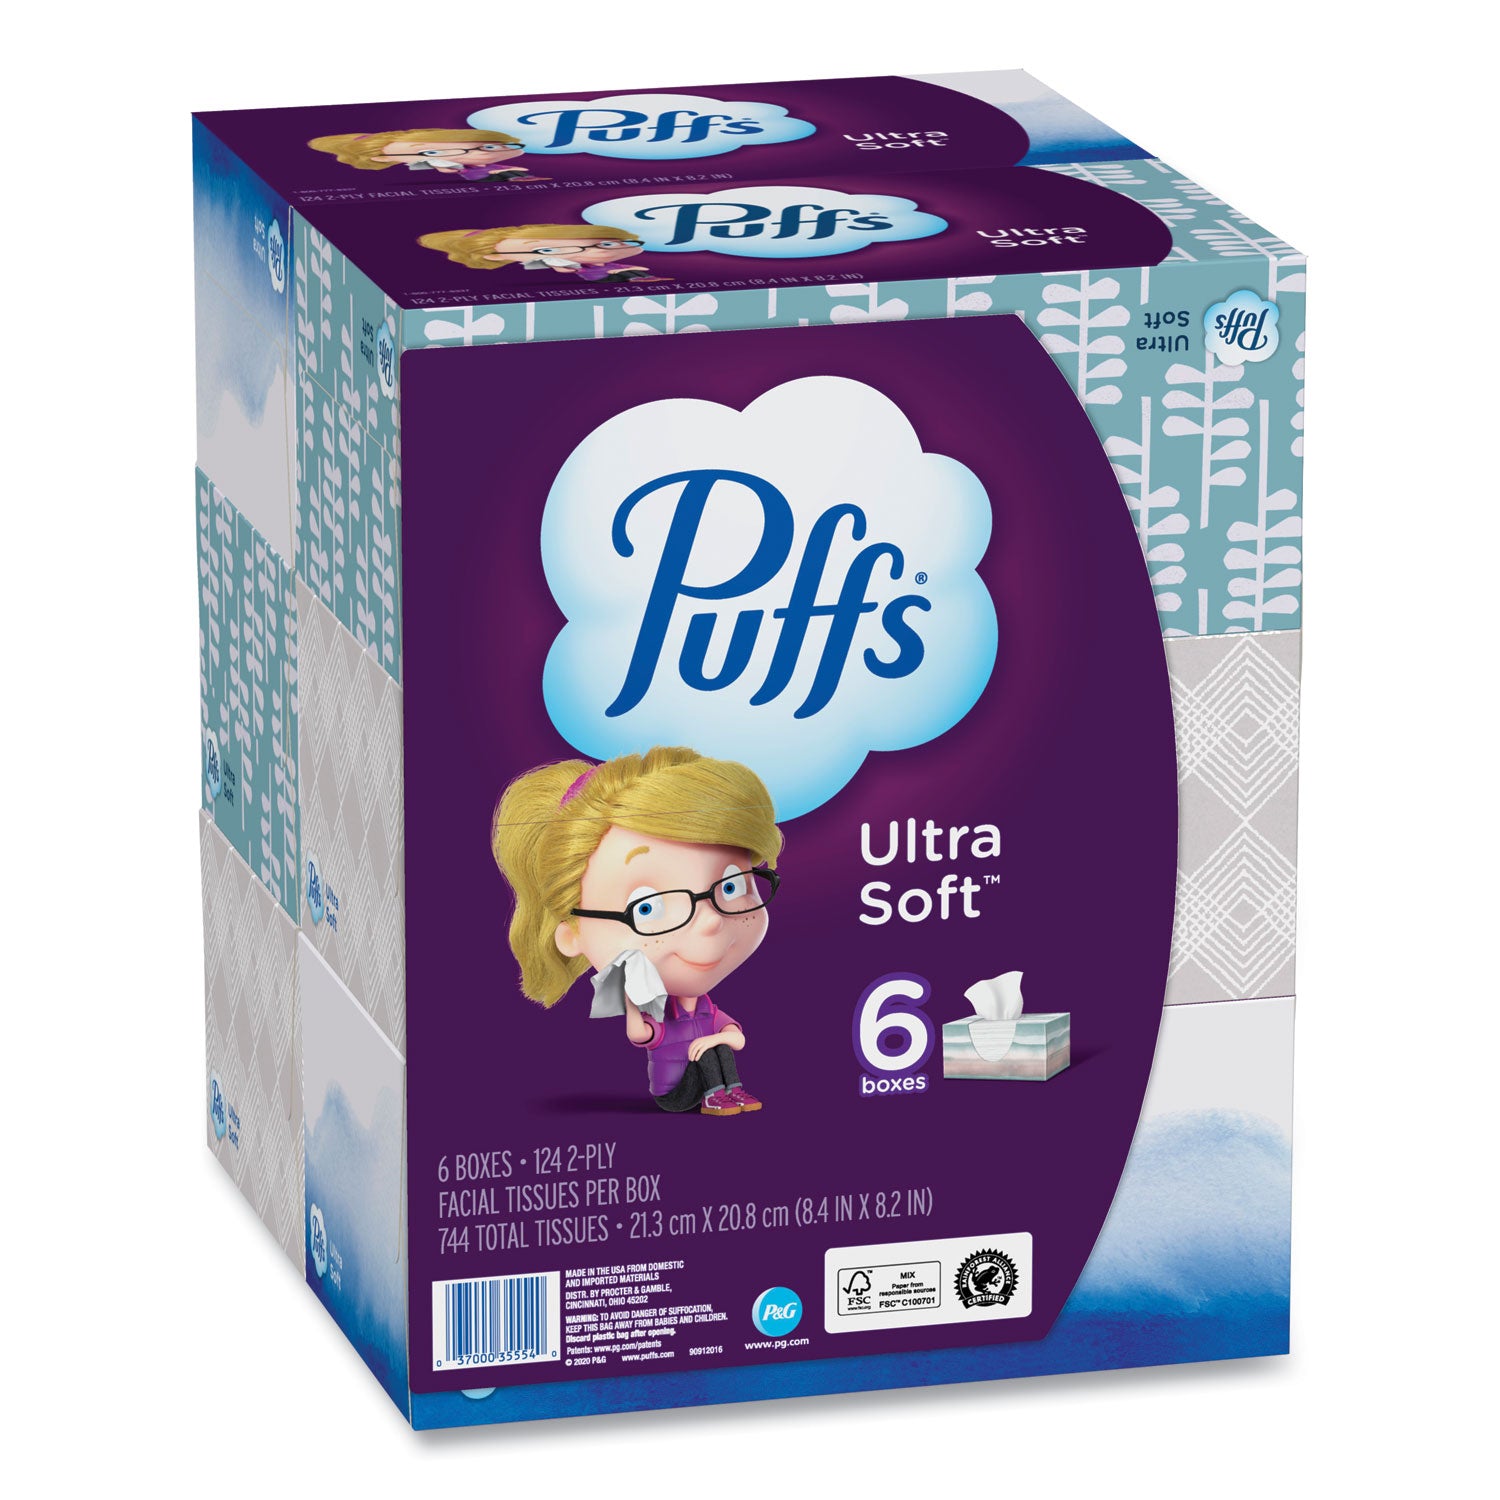 ultra-soft-facial-tissue-2-ply-white-124-sheets-box-6-boxes-pack-4-packs-carton_pgc35554 - 3